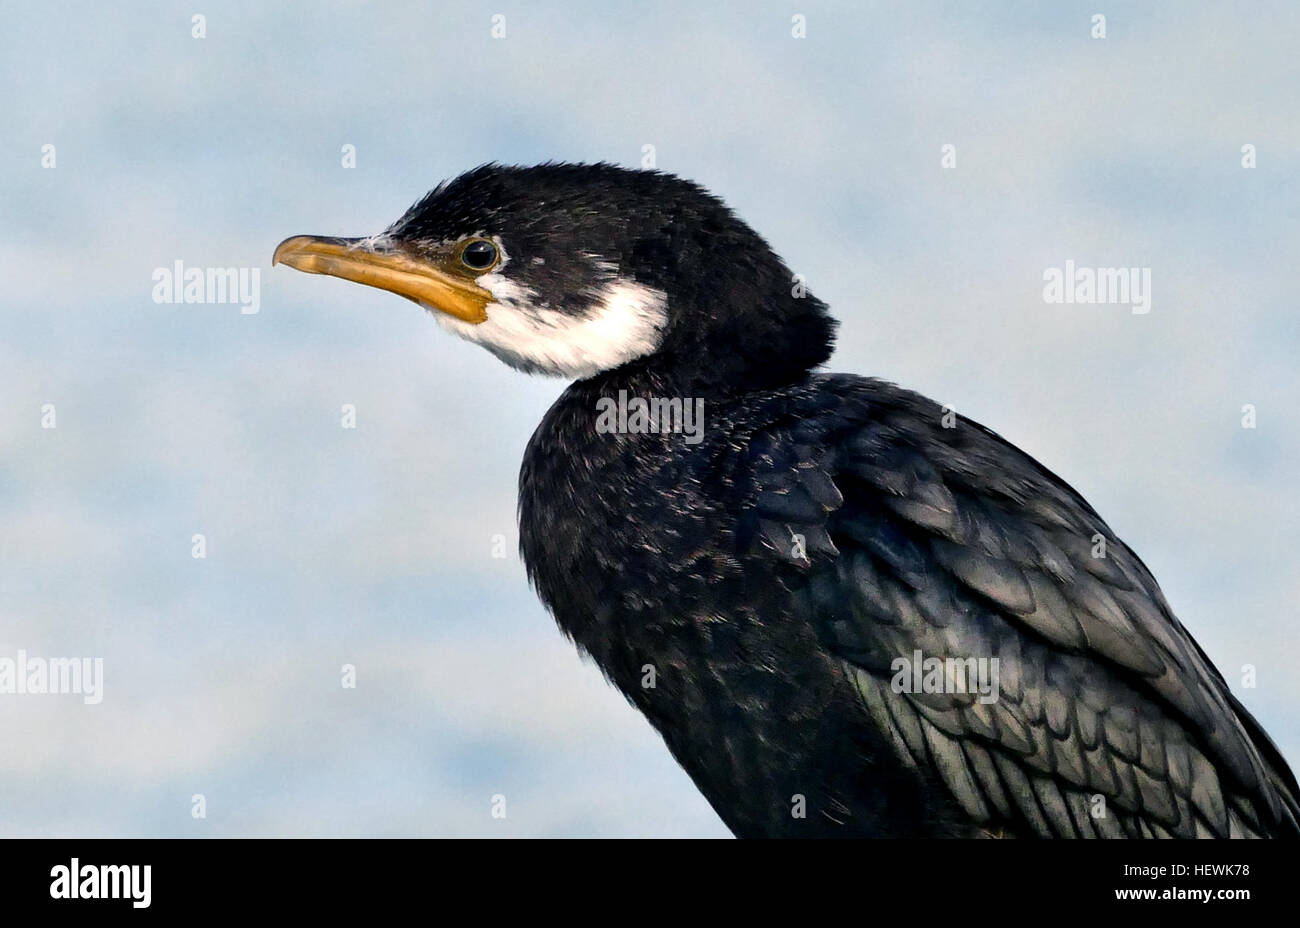 This large black-and-white shag is often seen individually or in small groups roosting on rocky headlands, trees or artificial structures. In regions where it occurs it can usually be readily seen about harbours and estuaries associated with cities or towns. Unlike most other shag species, the pied shag is reasonably confiding, allowing close approach when roosting or nesting in trees. It generally forages alone, but occasionally in small groups when prey is abundant. Stock Photo